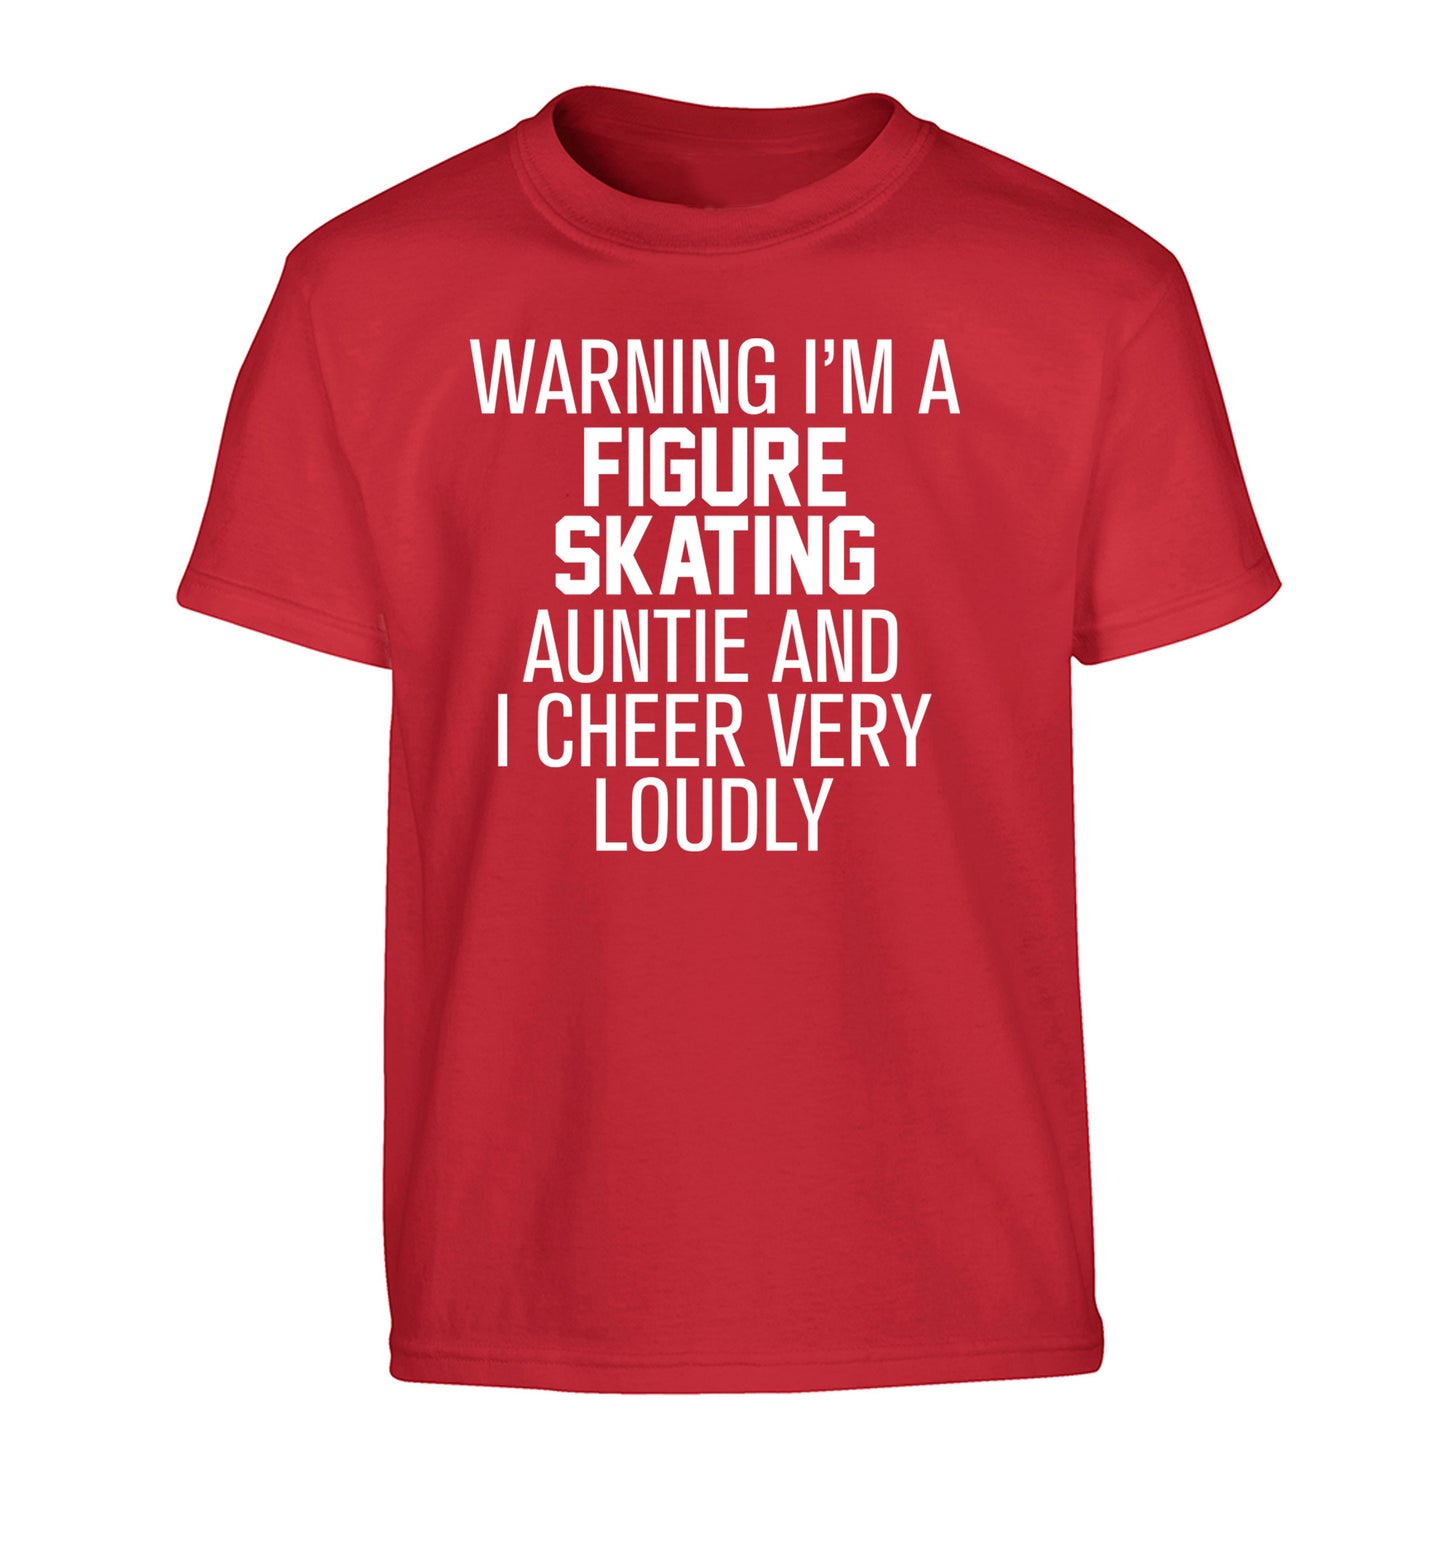 Warning I'm a figure skating auntie and I cheer very loudly Children's red Tshirt 12-14 Years